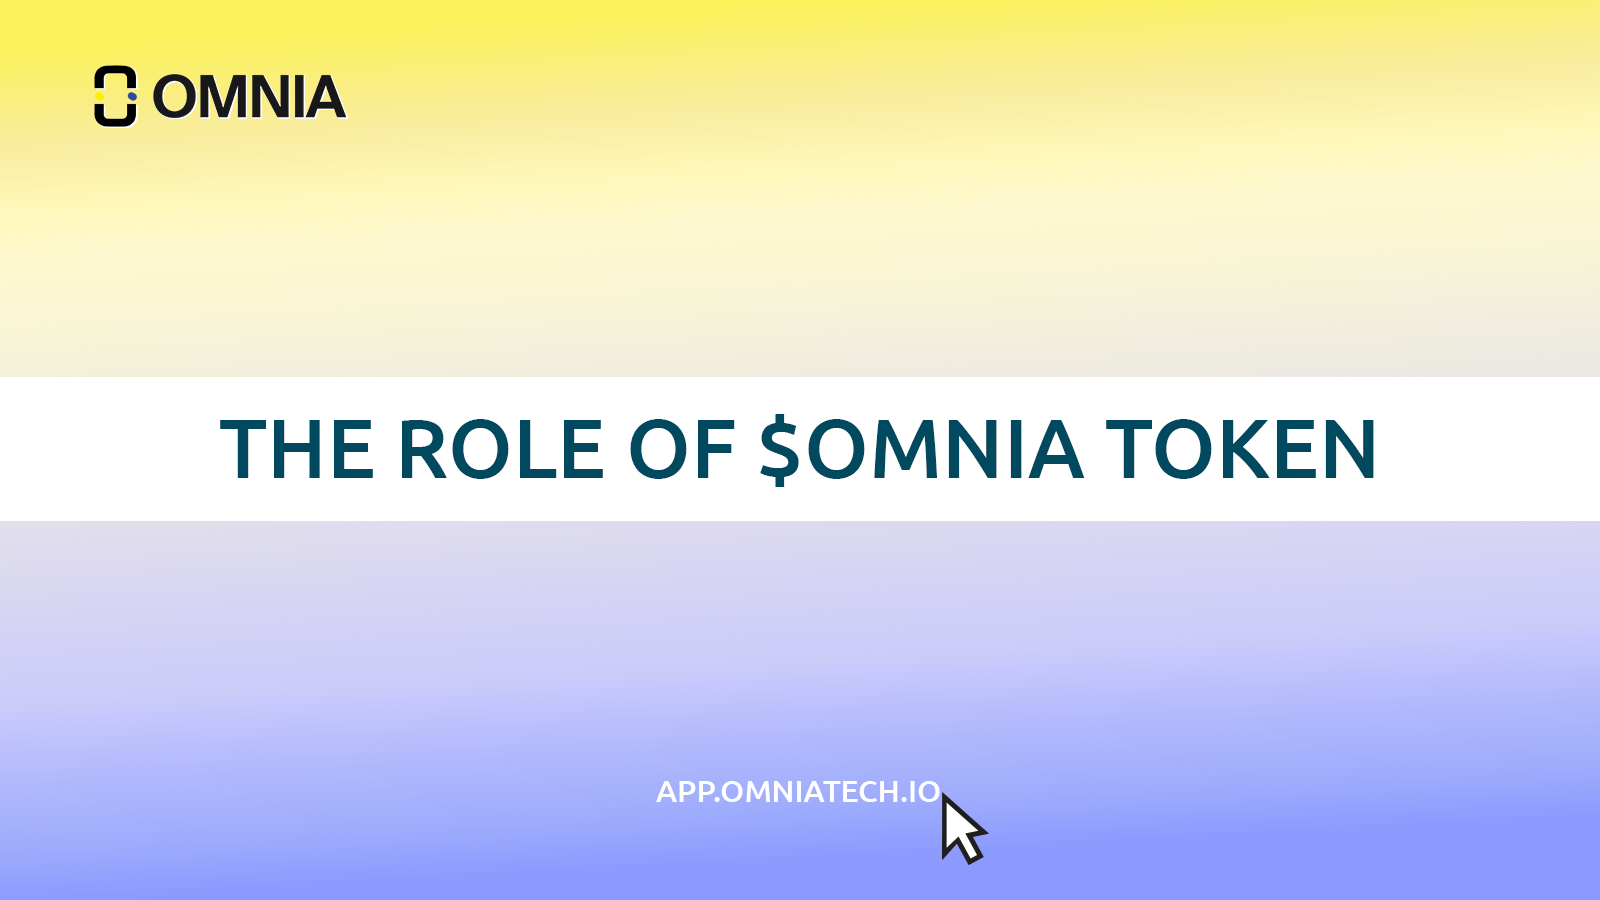 The role of $OMNIA token